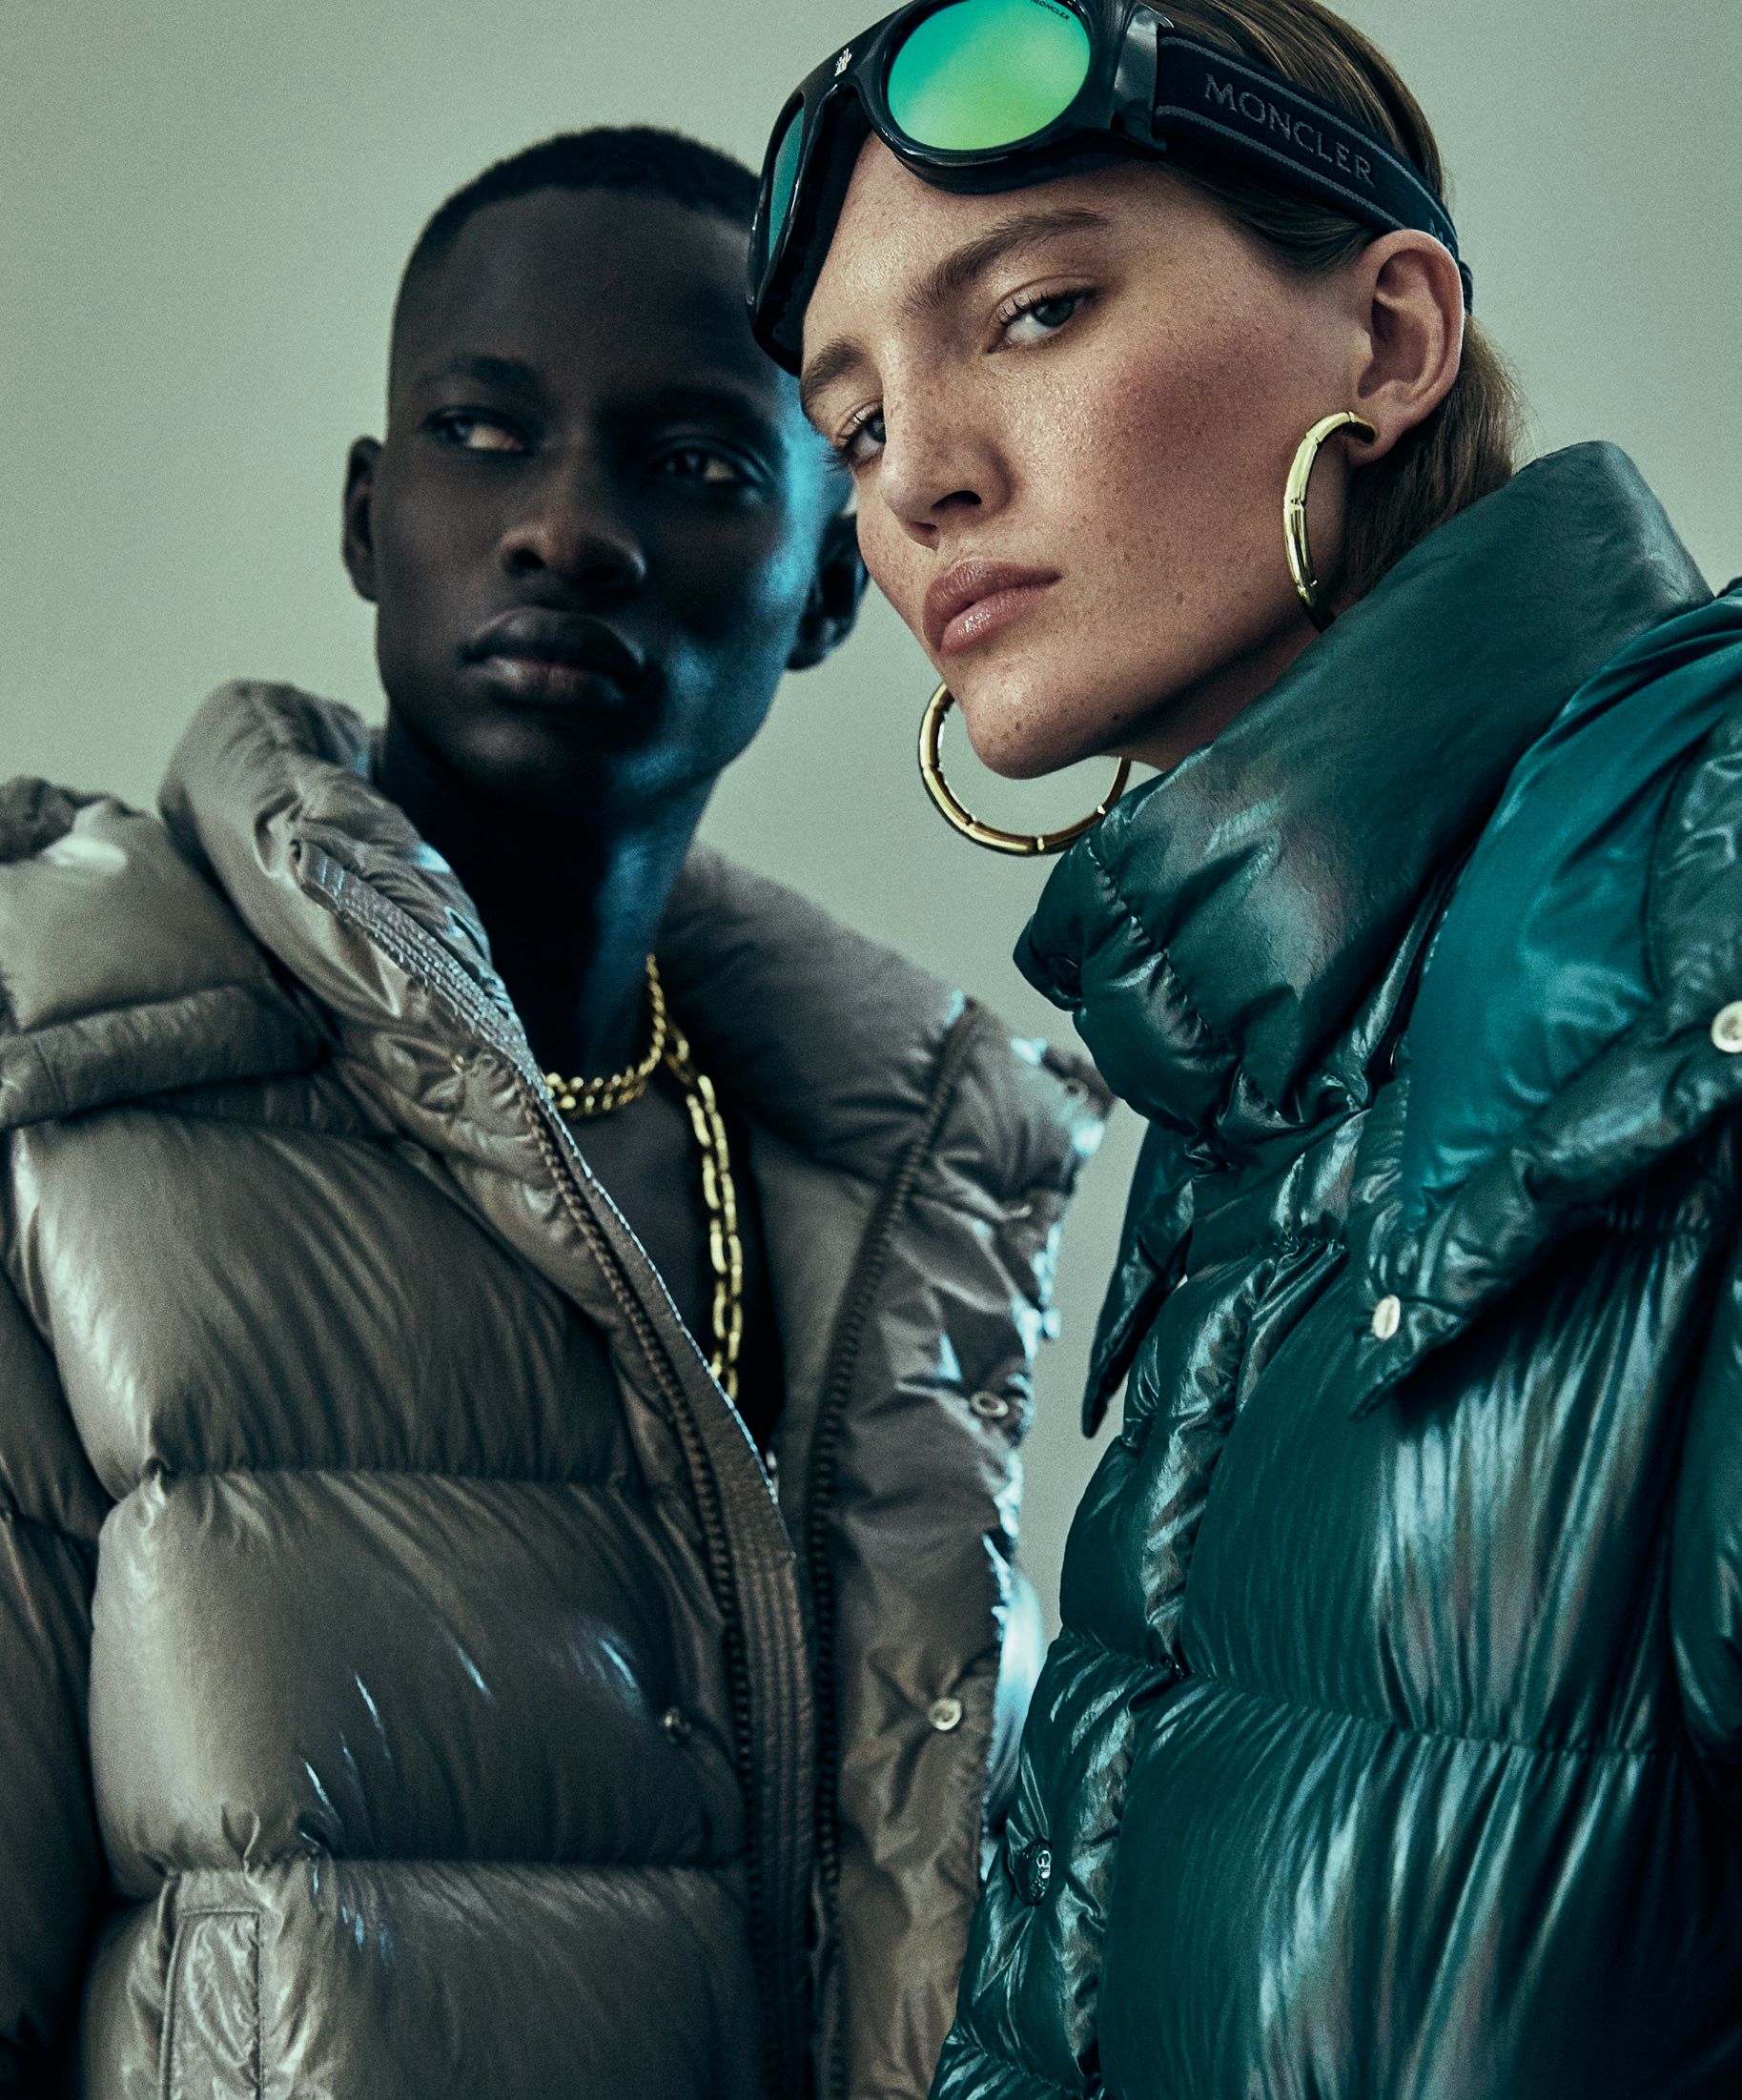 From left: Moncler Maya 70 down jacket in Basalt Gray and in Forest Green with Moncler Lunettes City ski goggles with elastic band, moncler.com. Photographed by Yossi Michaeli Styled by Faye Power Vande Vrede